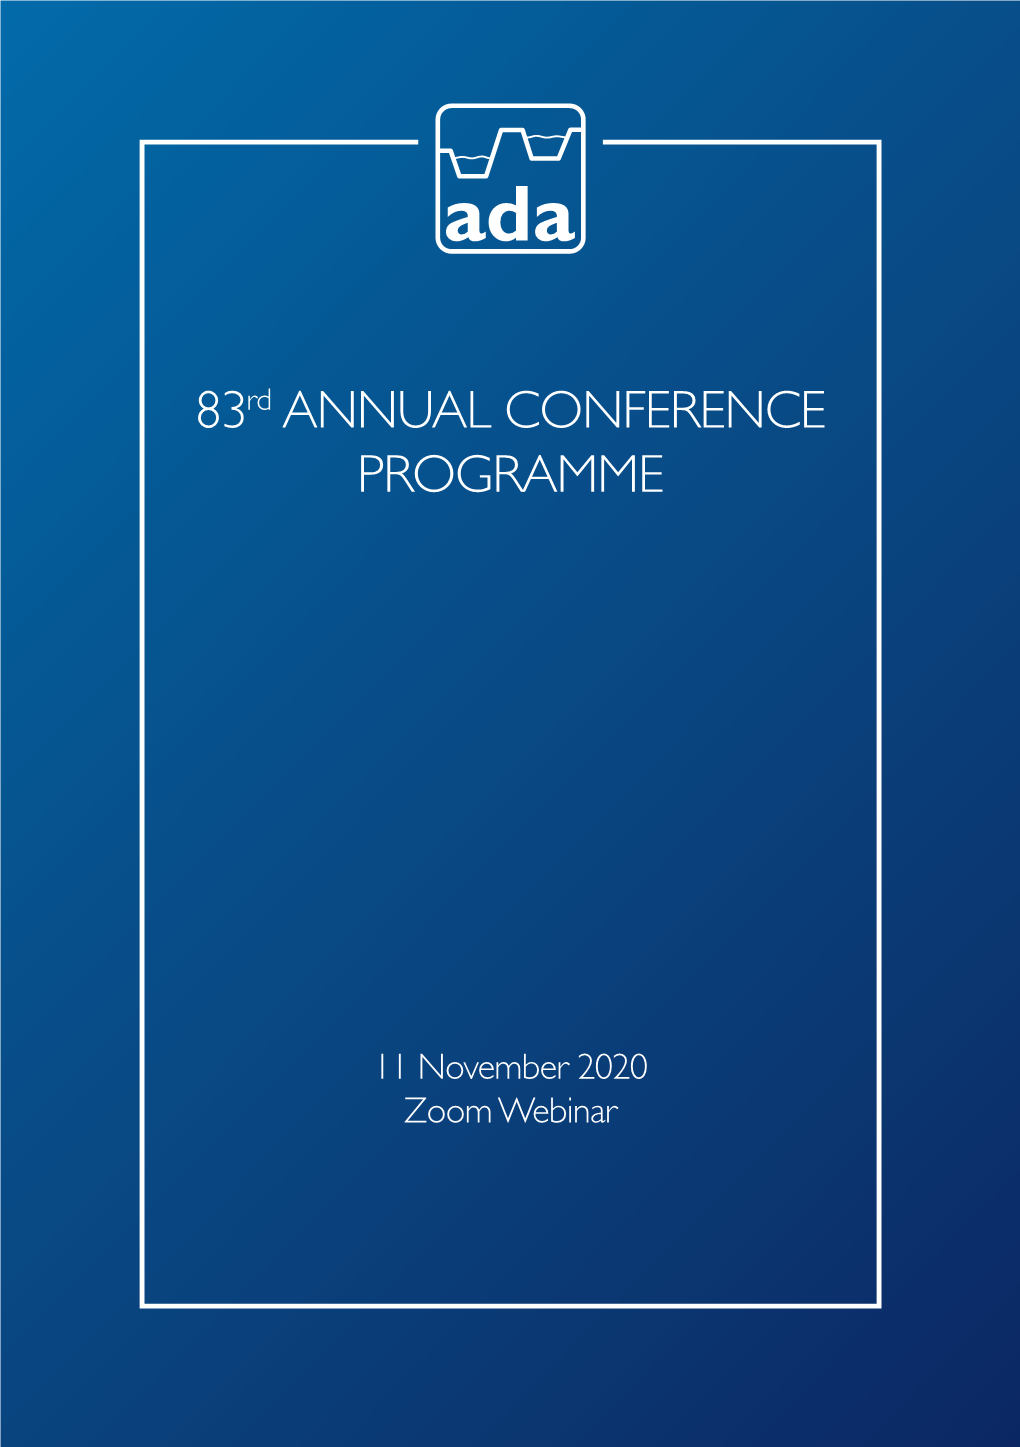 Conference Programme 2020